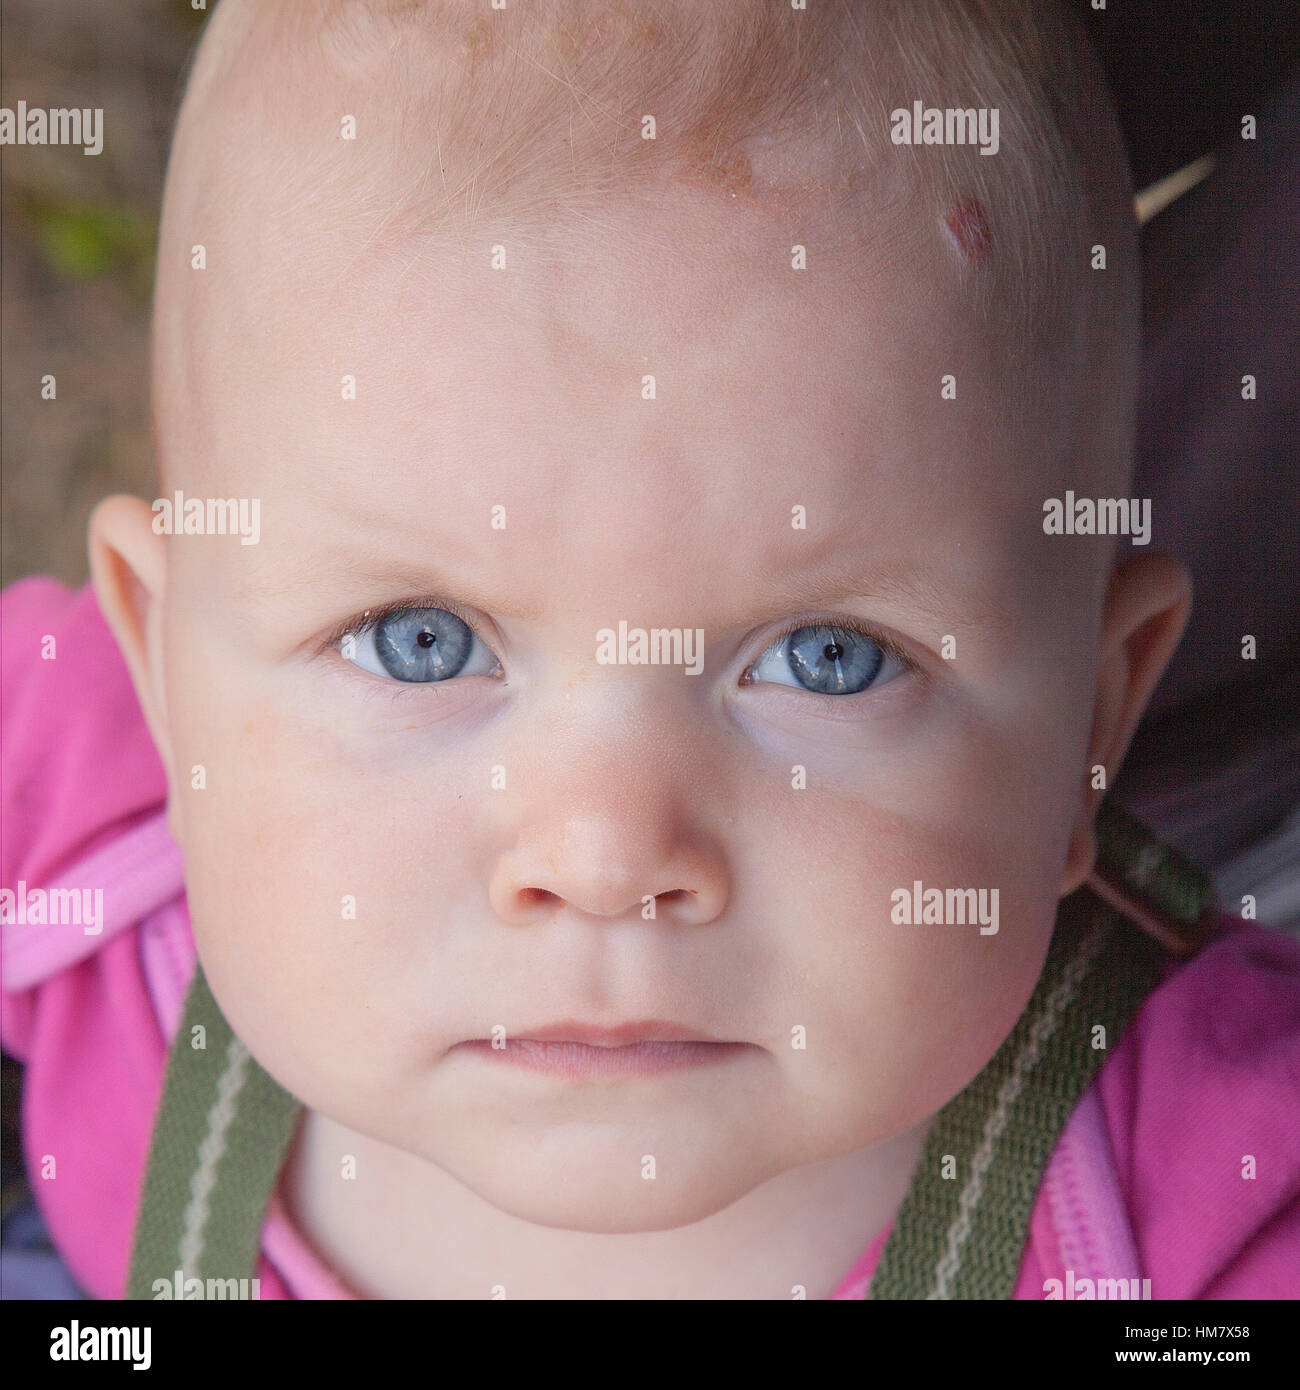 Close up portrait of baby girl with blue eyes and hemangioma Stock Photo